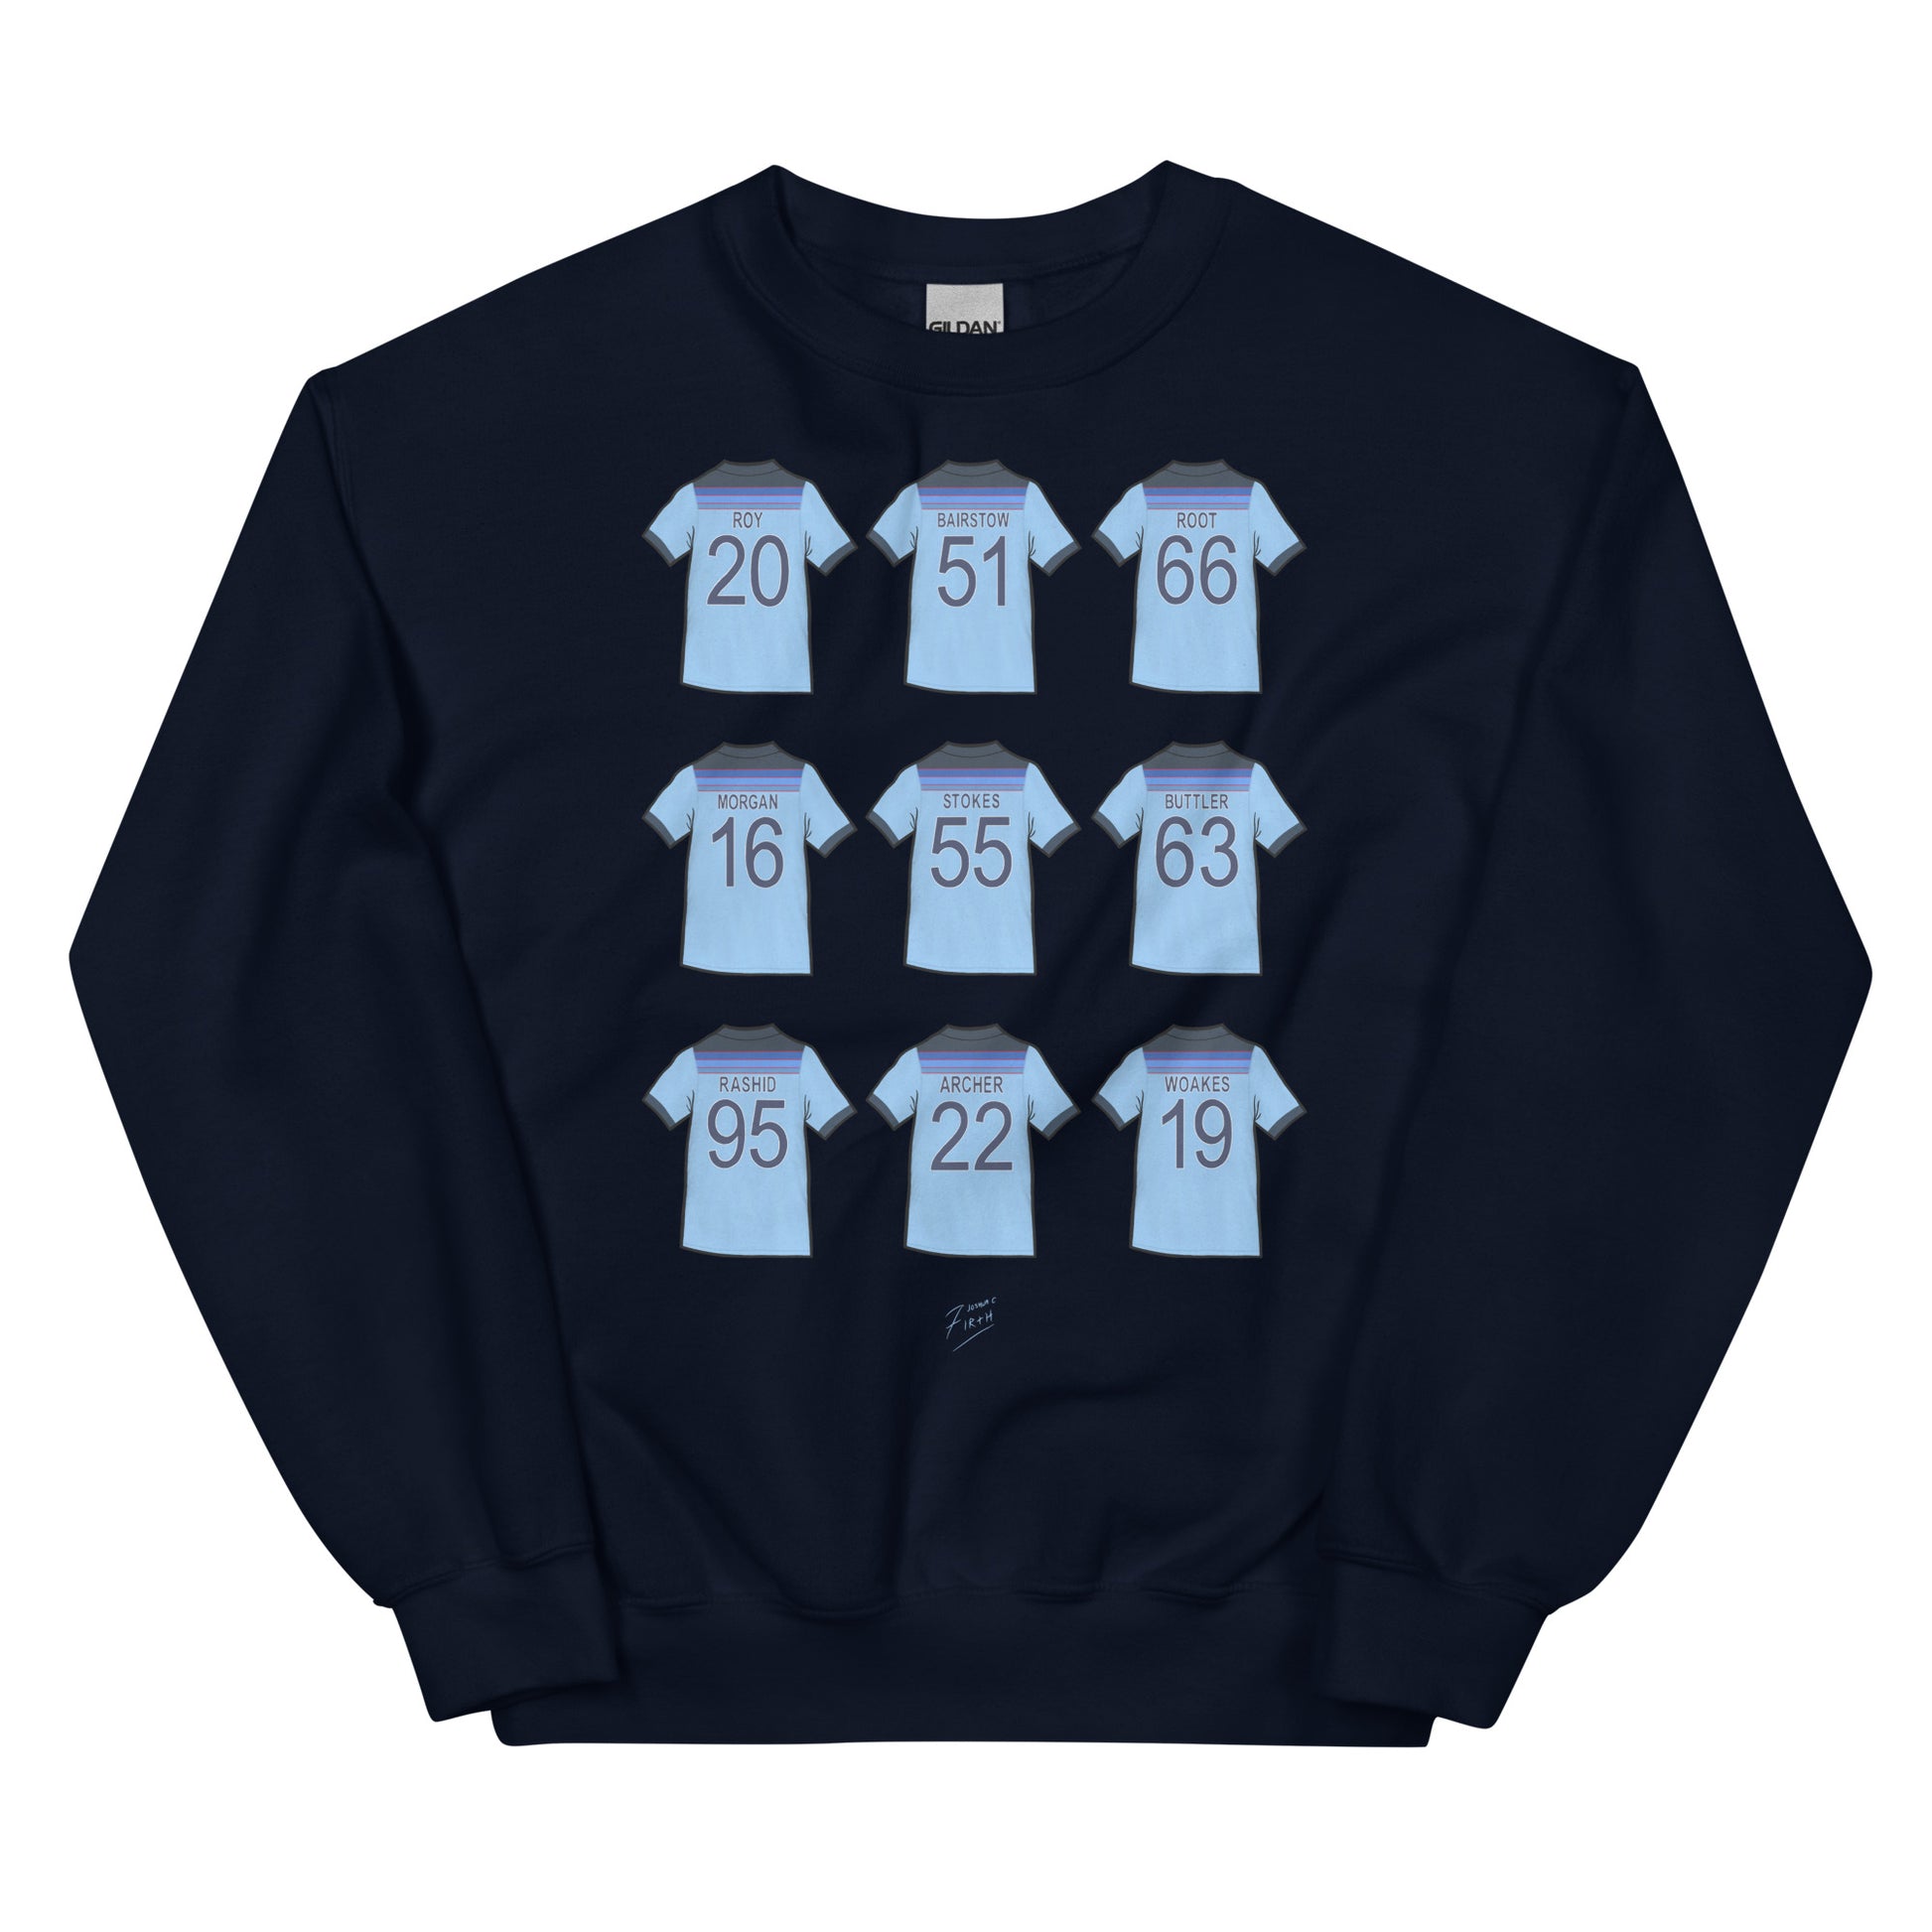 Navy blue T-shirt England cricket sweatshirt jumper inspired by those jerseys of world cup 2019